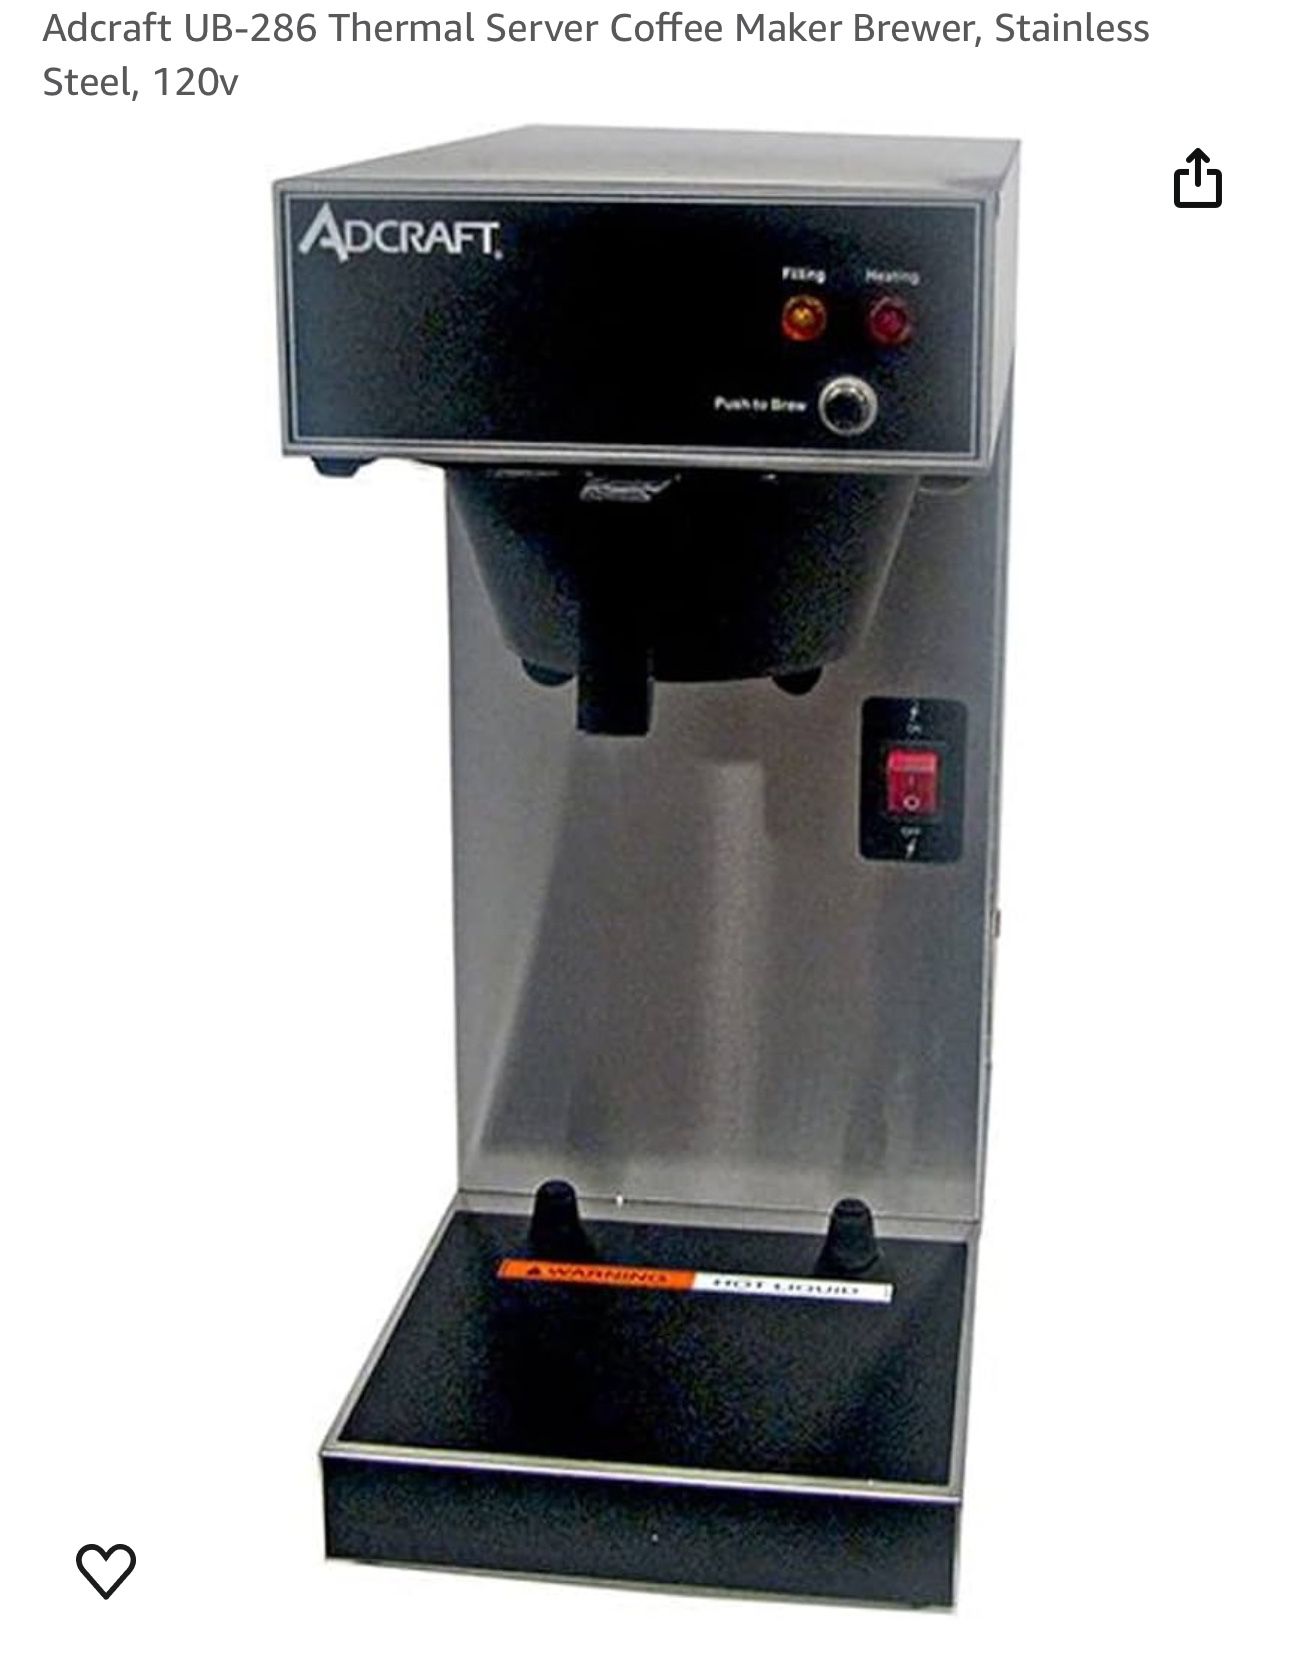 Adcraft UB-286 Thermal Server Coffee Maker Brewer, Stainless Steel, 120v